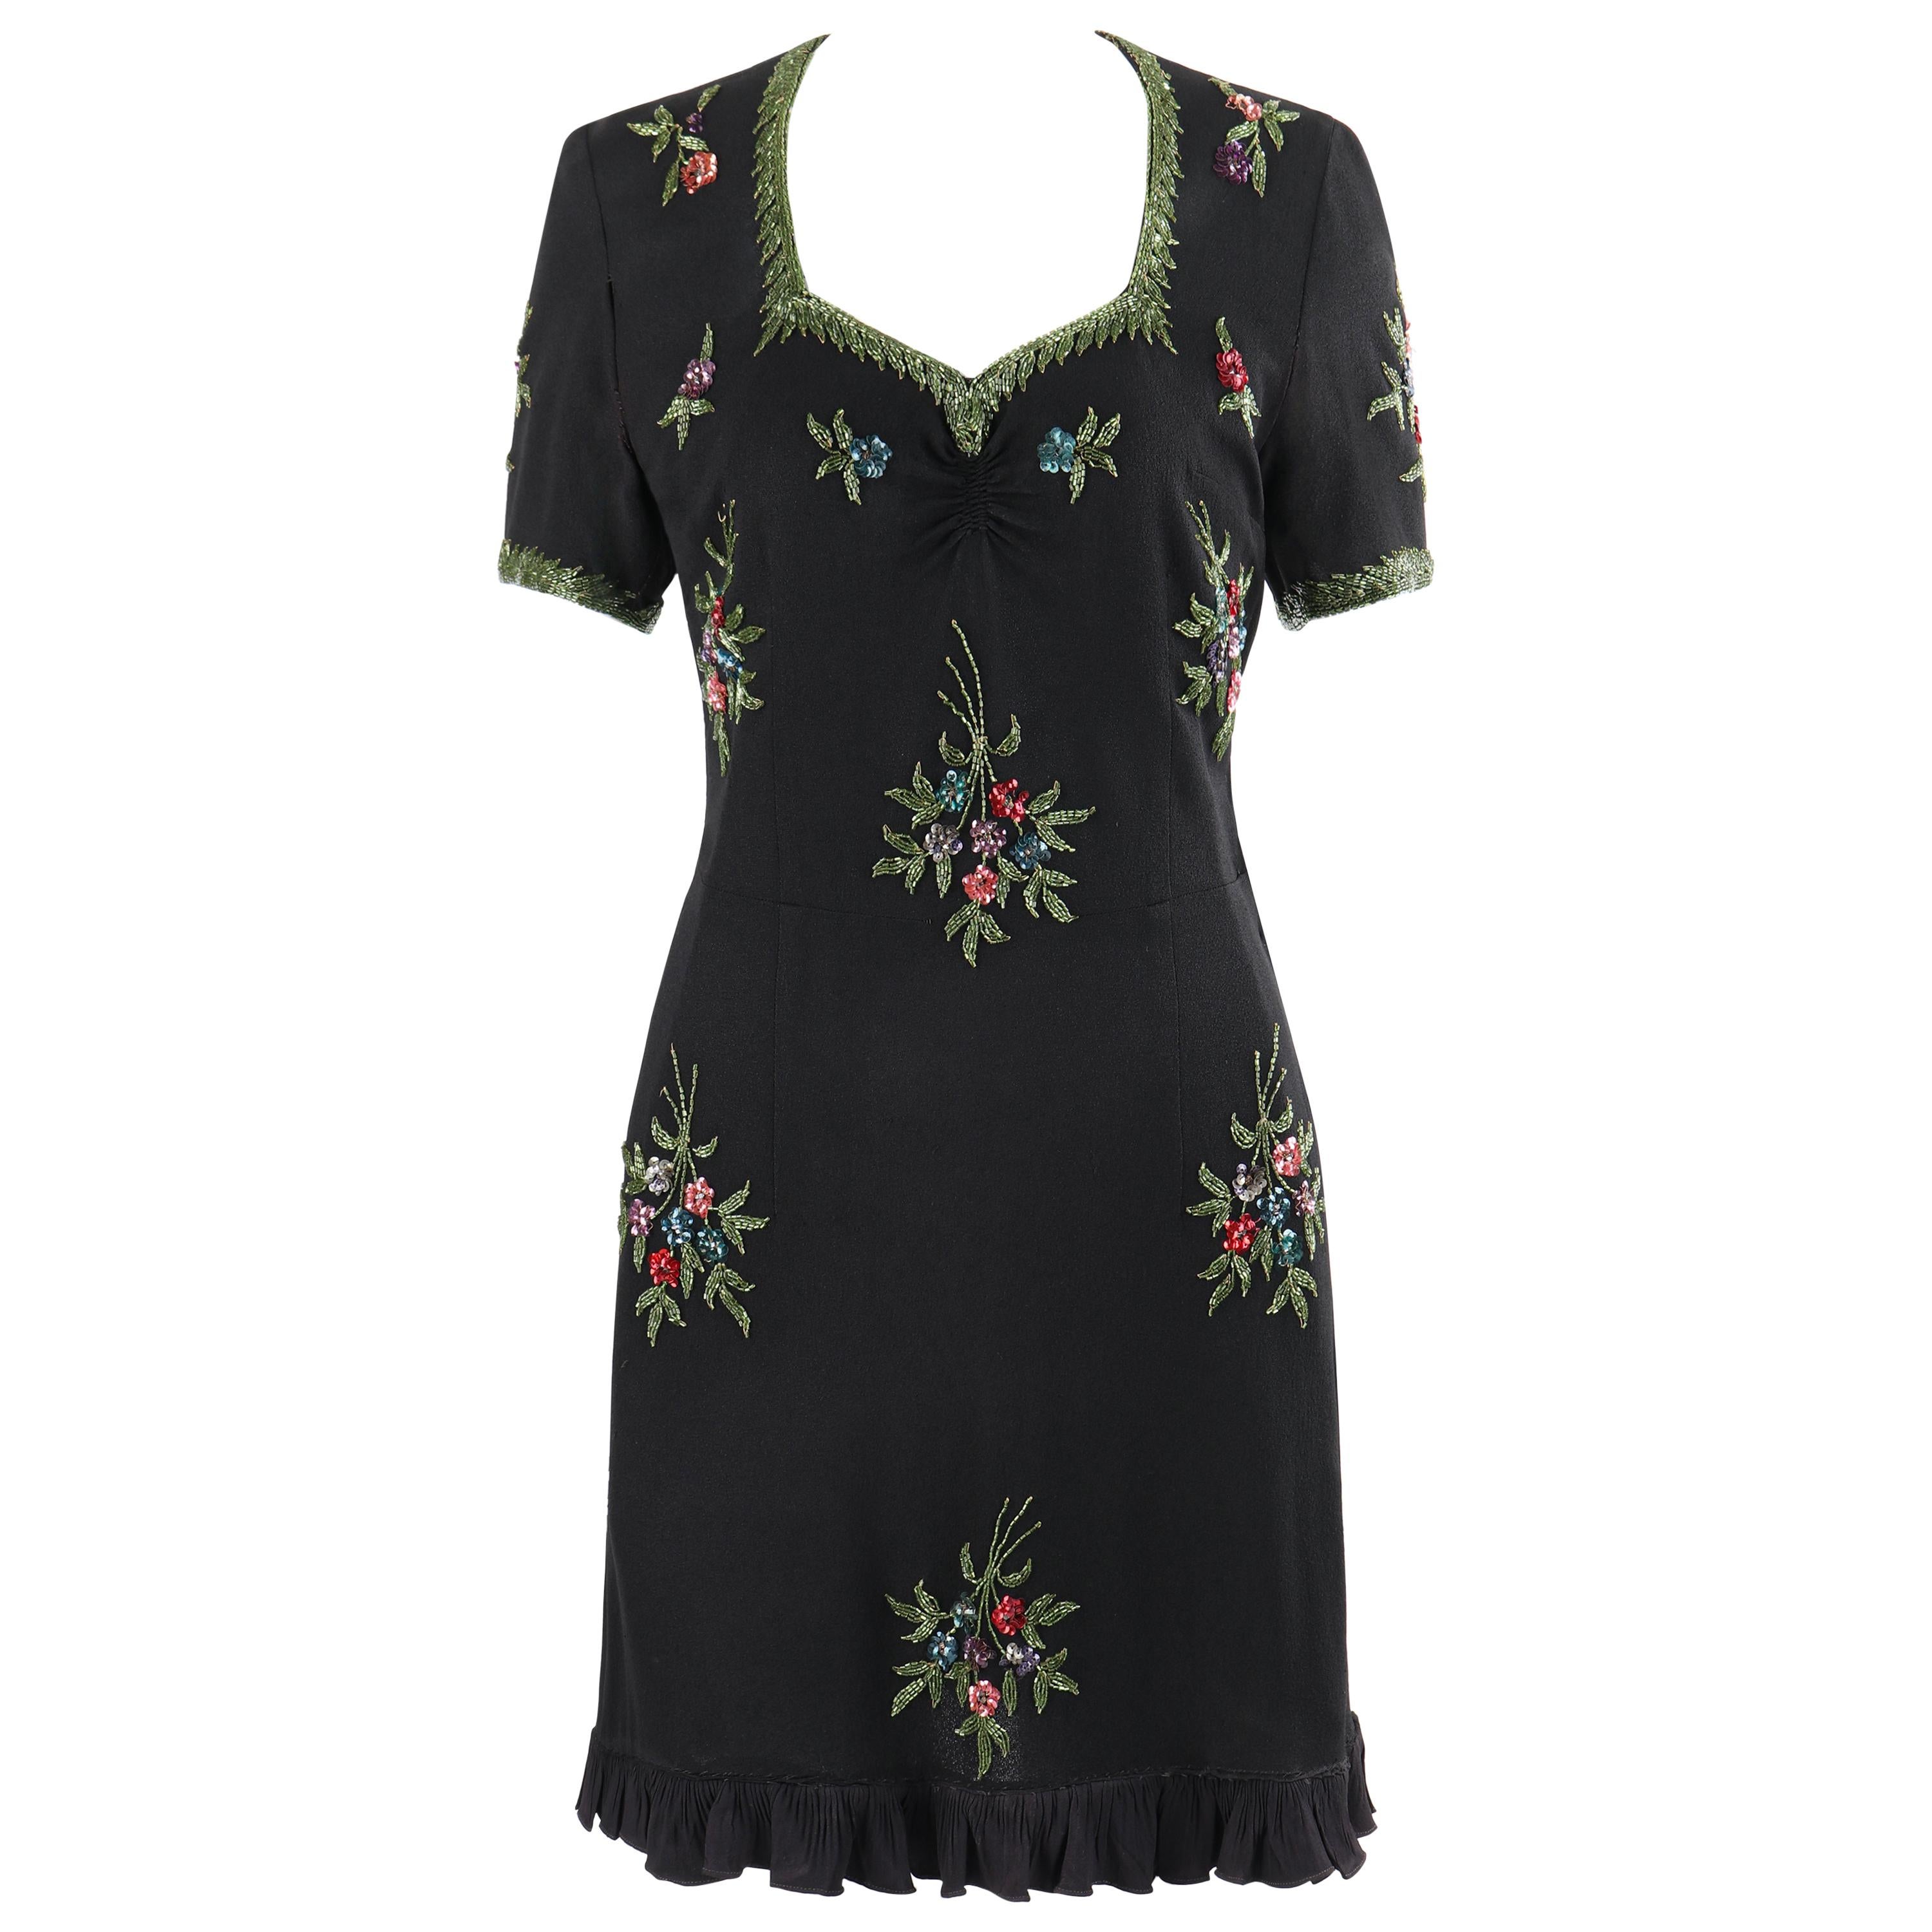 Couture c. 1940’s Black Multicolor Floral Glass Bead Embroidered Shift Dress